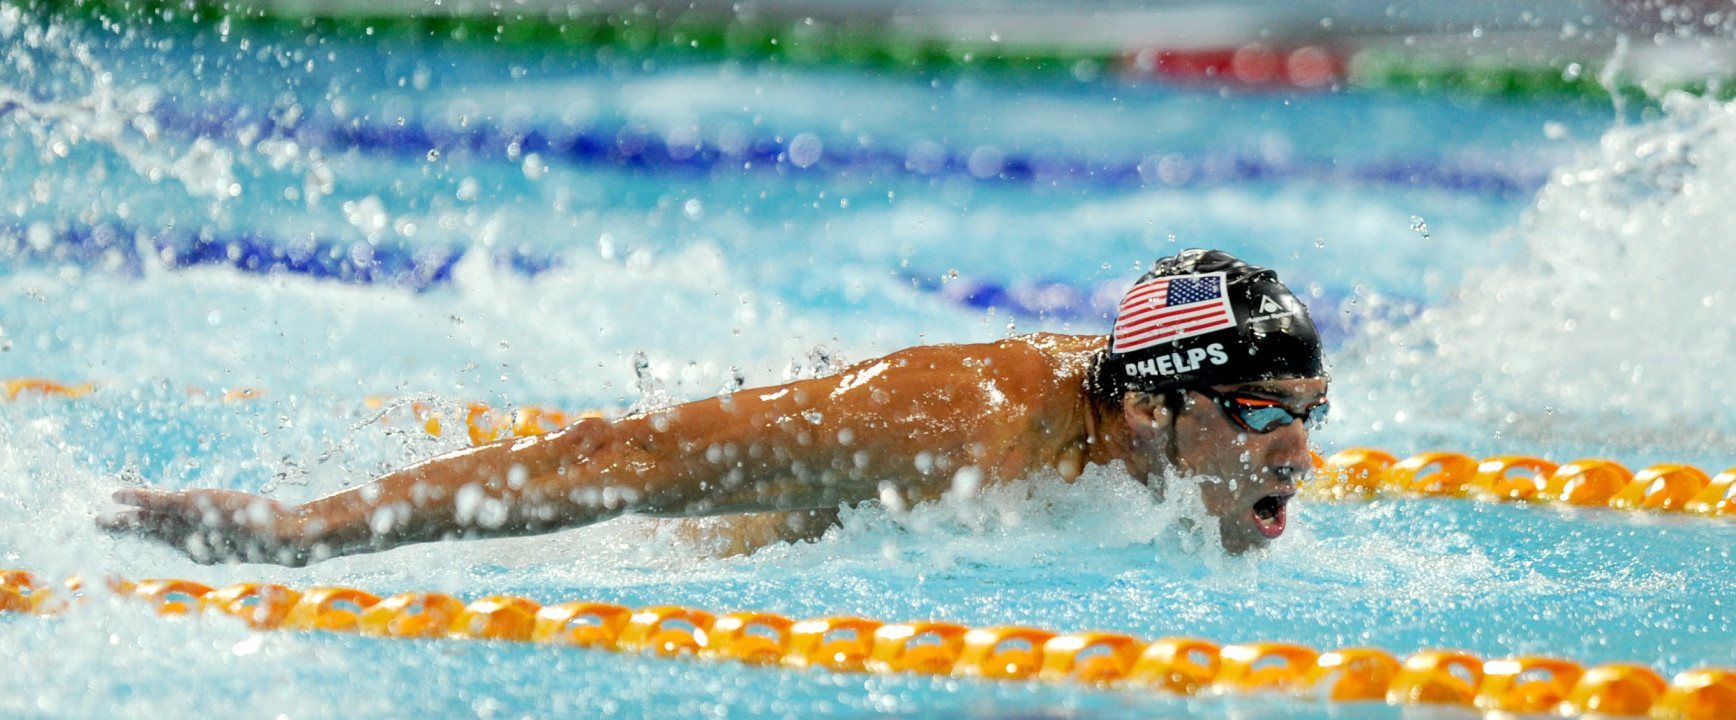 USA Swimming Announces 2014 Golden Goggles Nominees